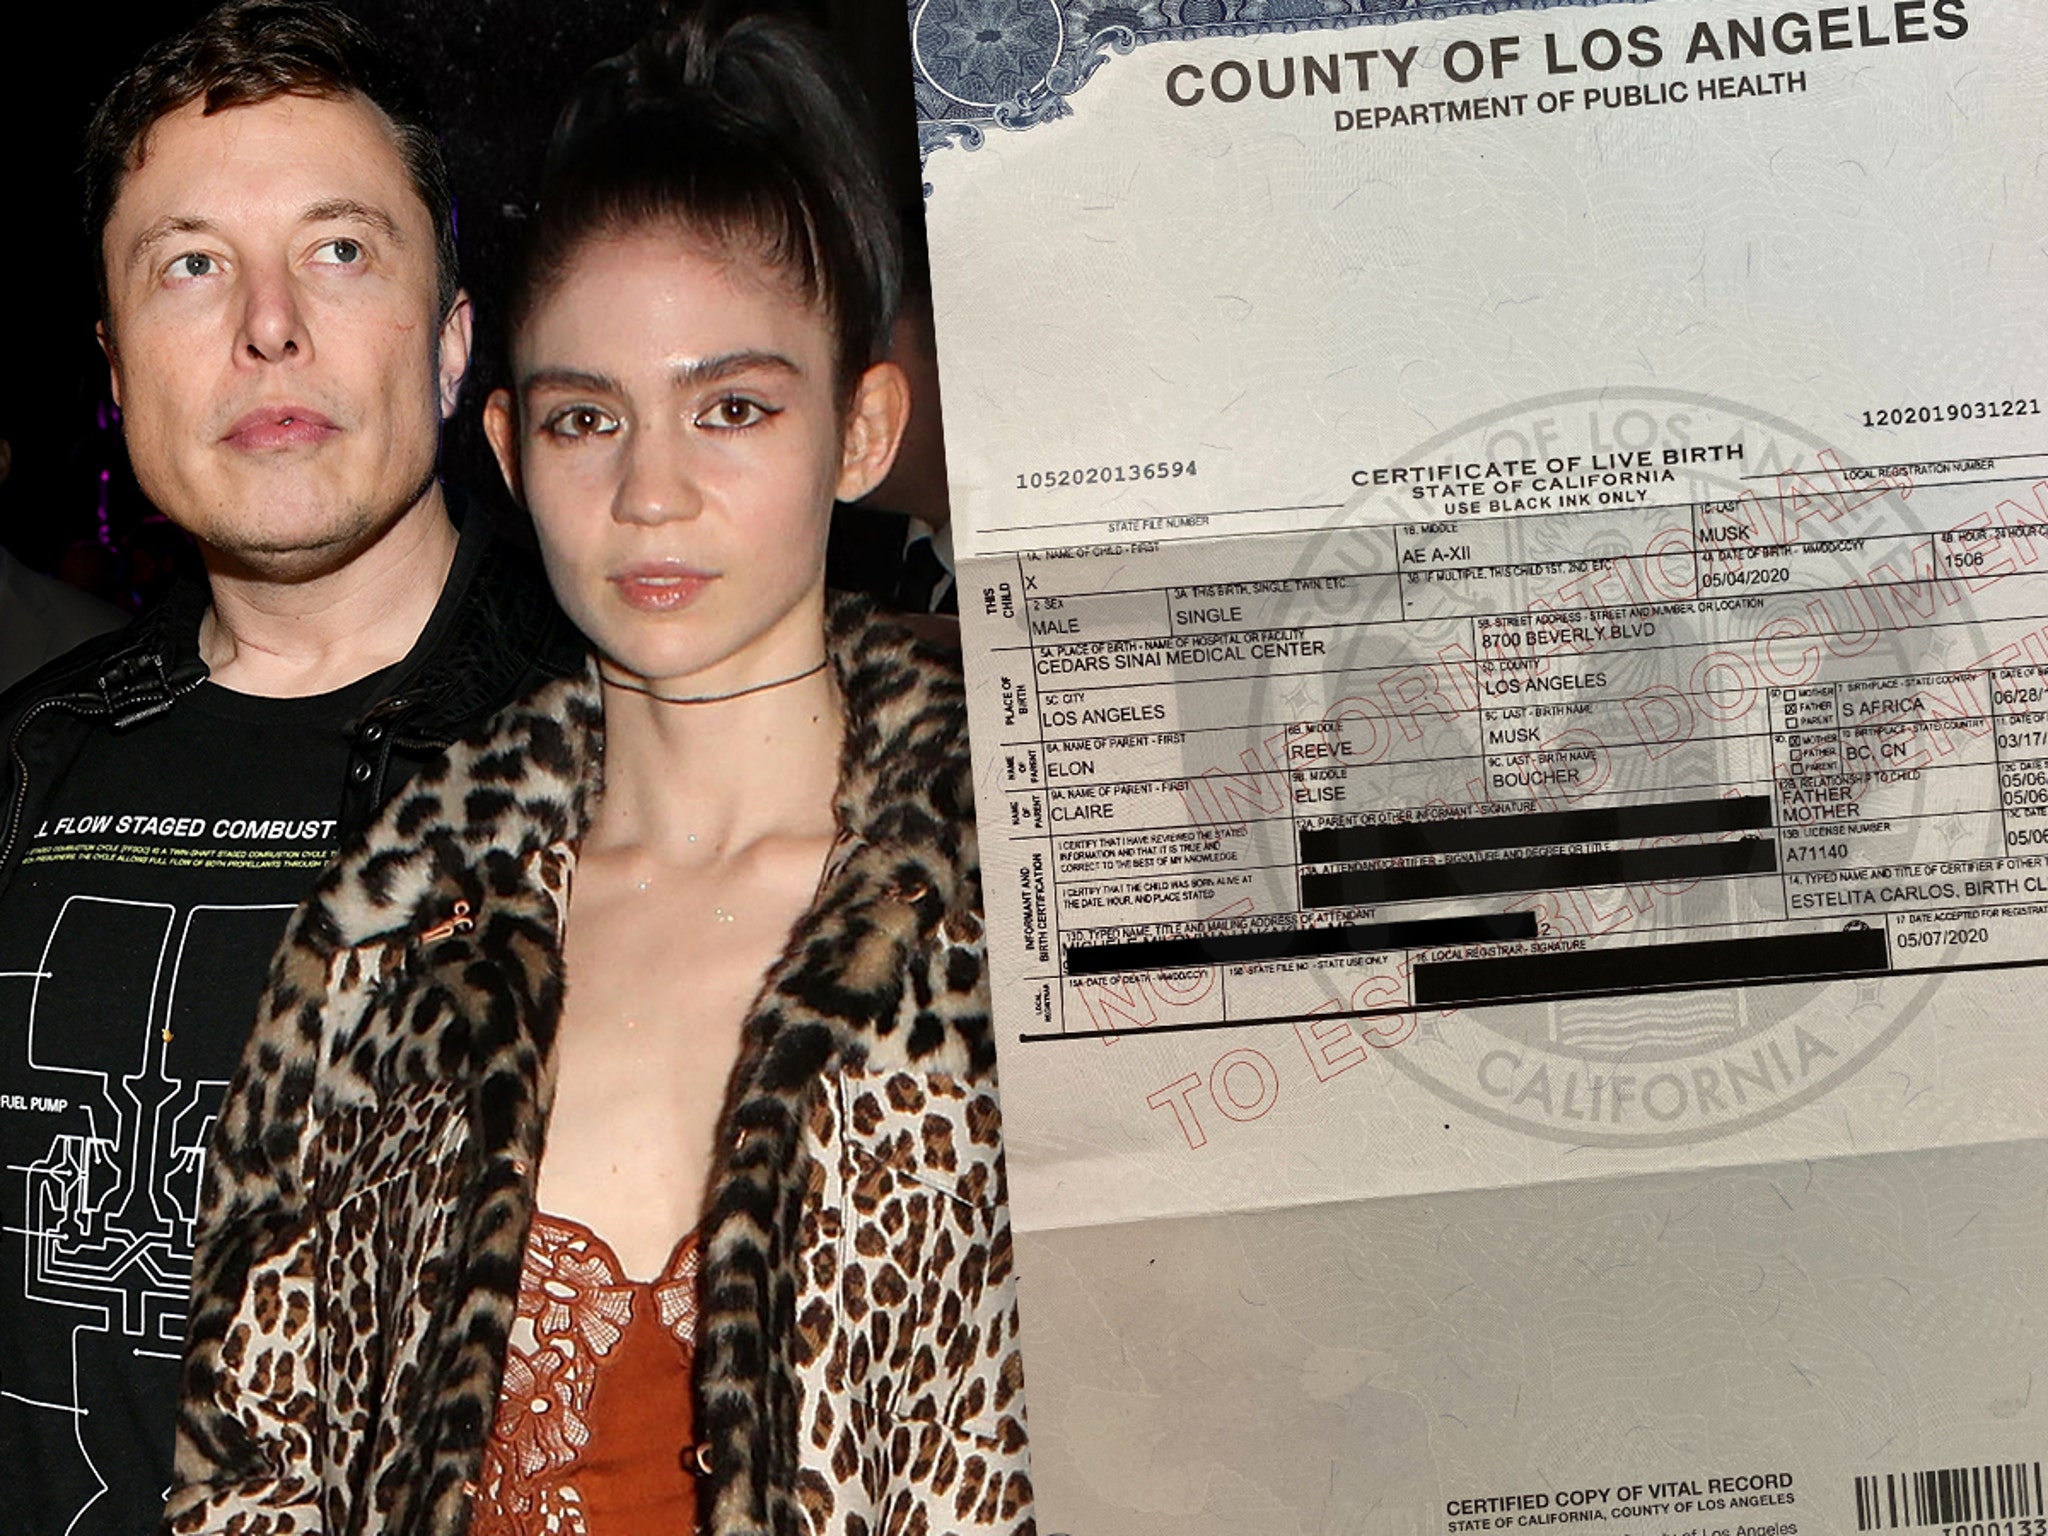 Elon Musk And Grimes Named Baby X Ae A Xii On Birth Certificate